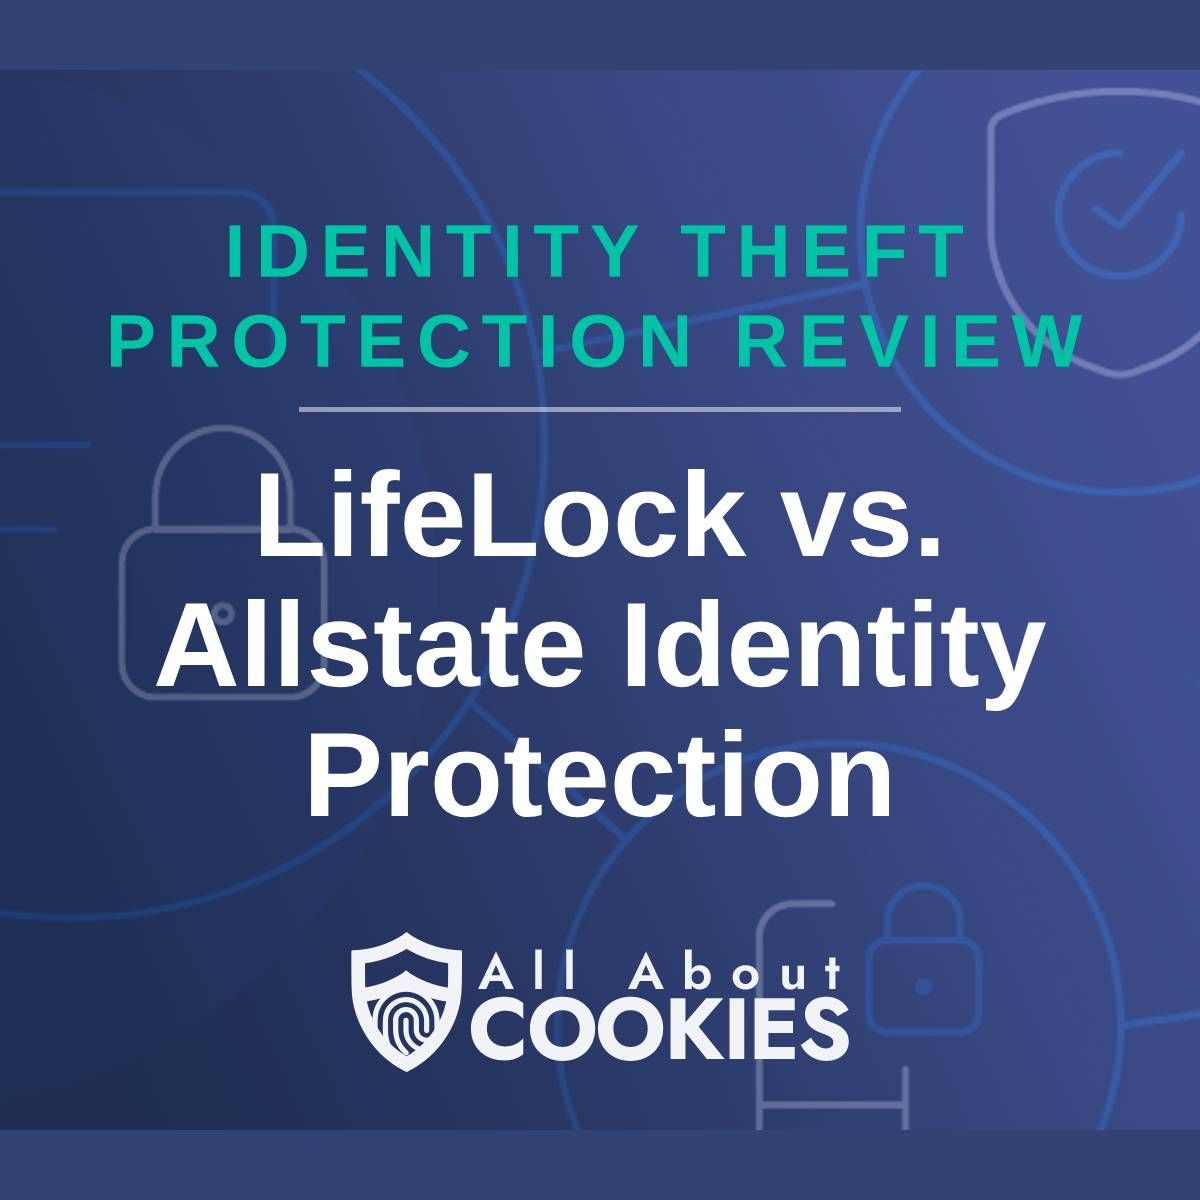 A blue background with images of locks and shields with the text &quot;Identity Theft Protection Review LifeLock vs. Allstate Identity Protection&quot; and the All About Cookies logo. 